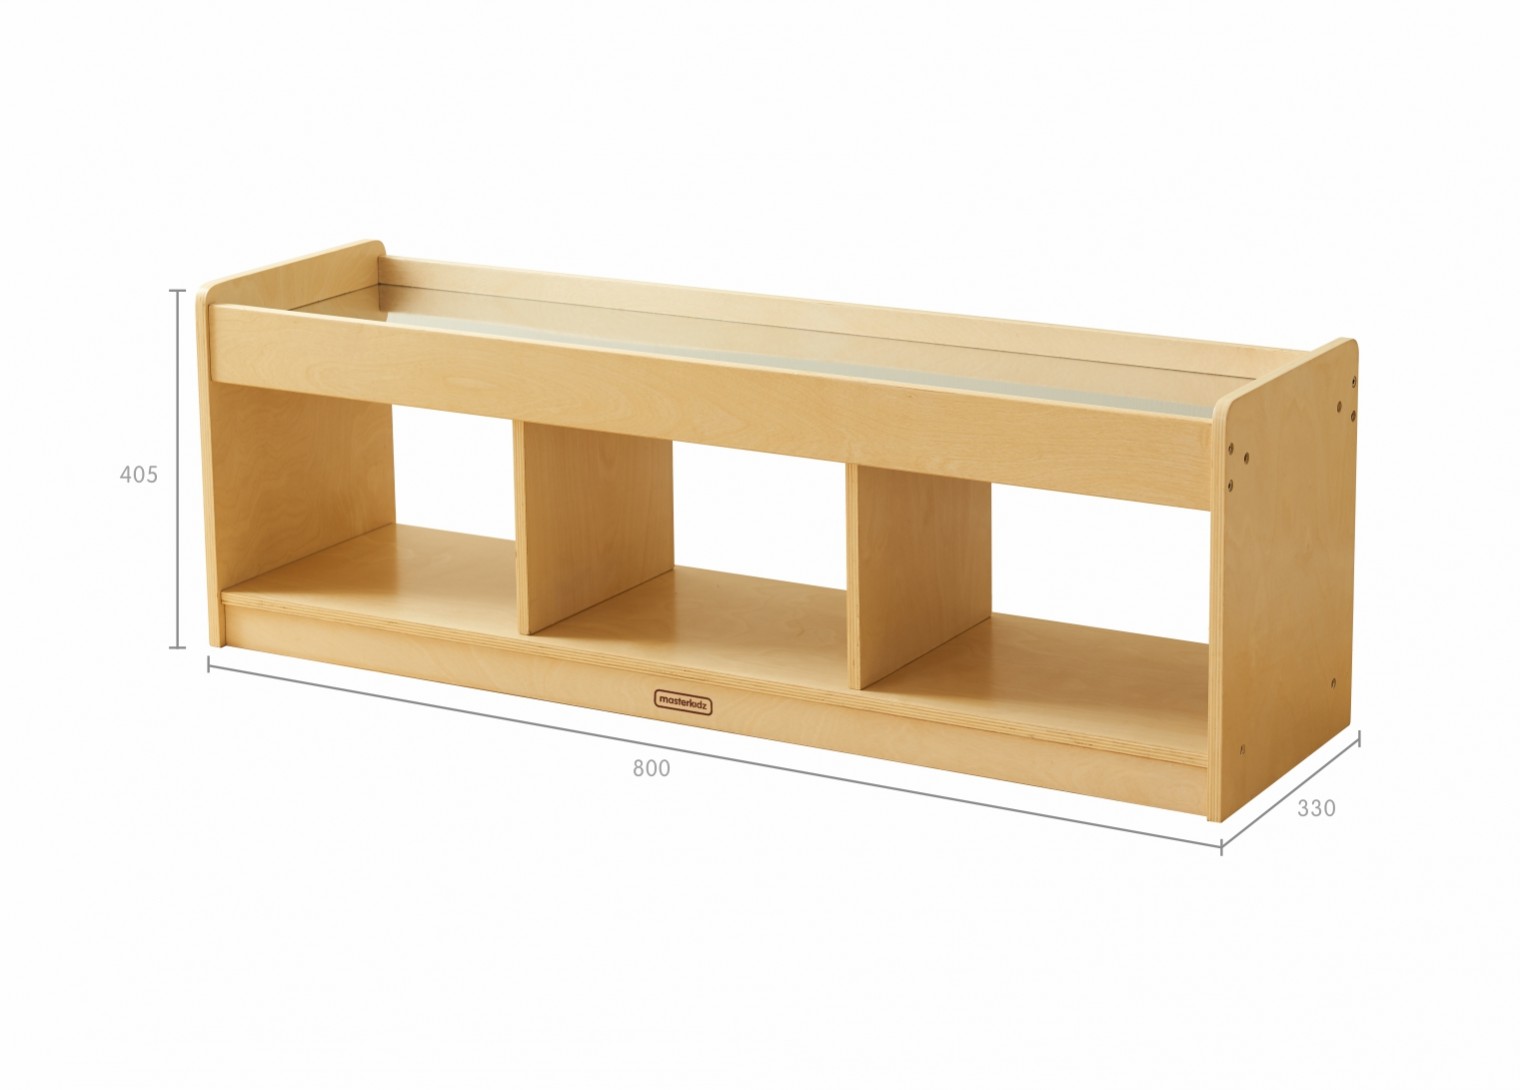 Toddler Play Center -1200L Mirrored Tabletop Shelving Unit